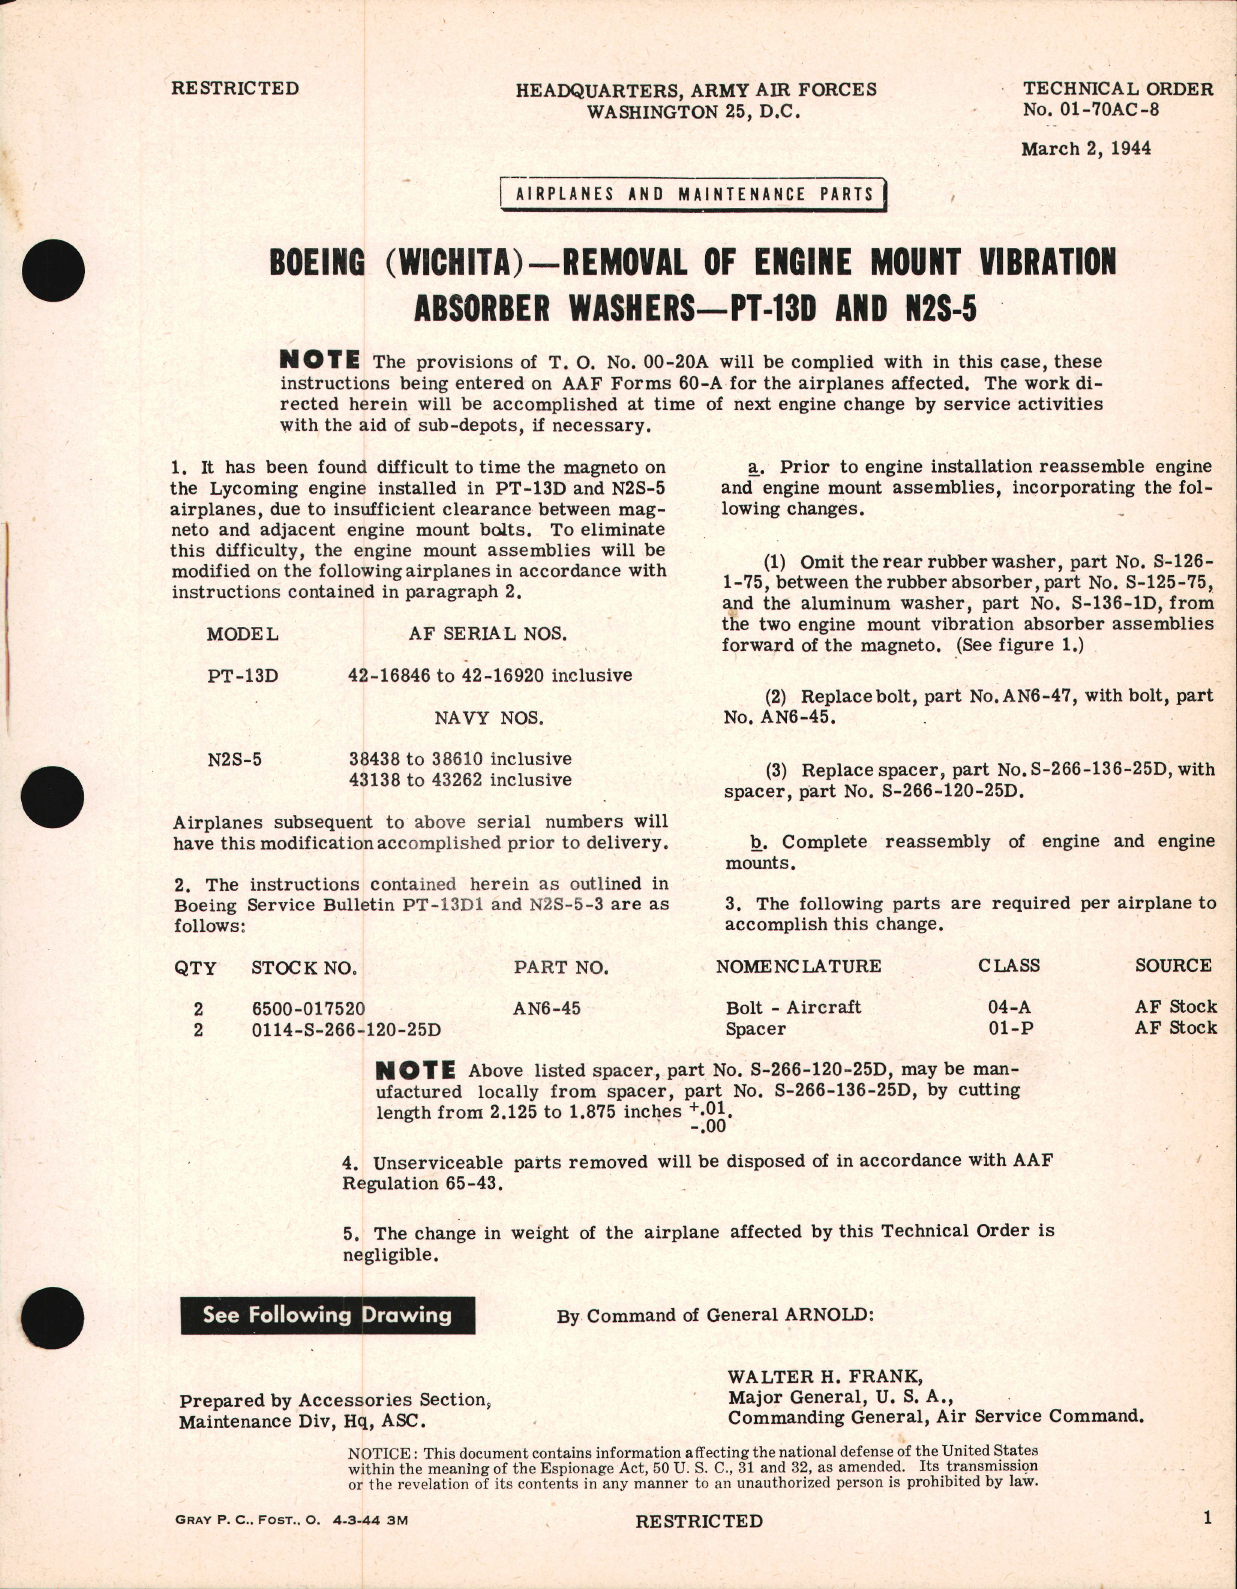 Sample page 1 from AirCorps Library document: Removal of Engine Mount Vibration Absorber Washers for PT-13 & N2S-5